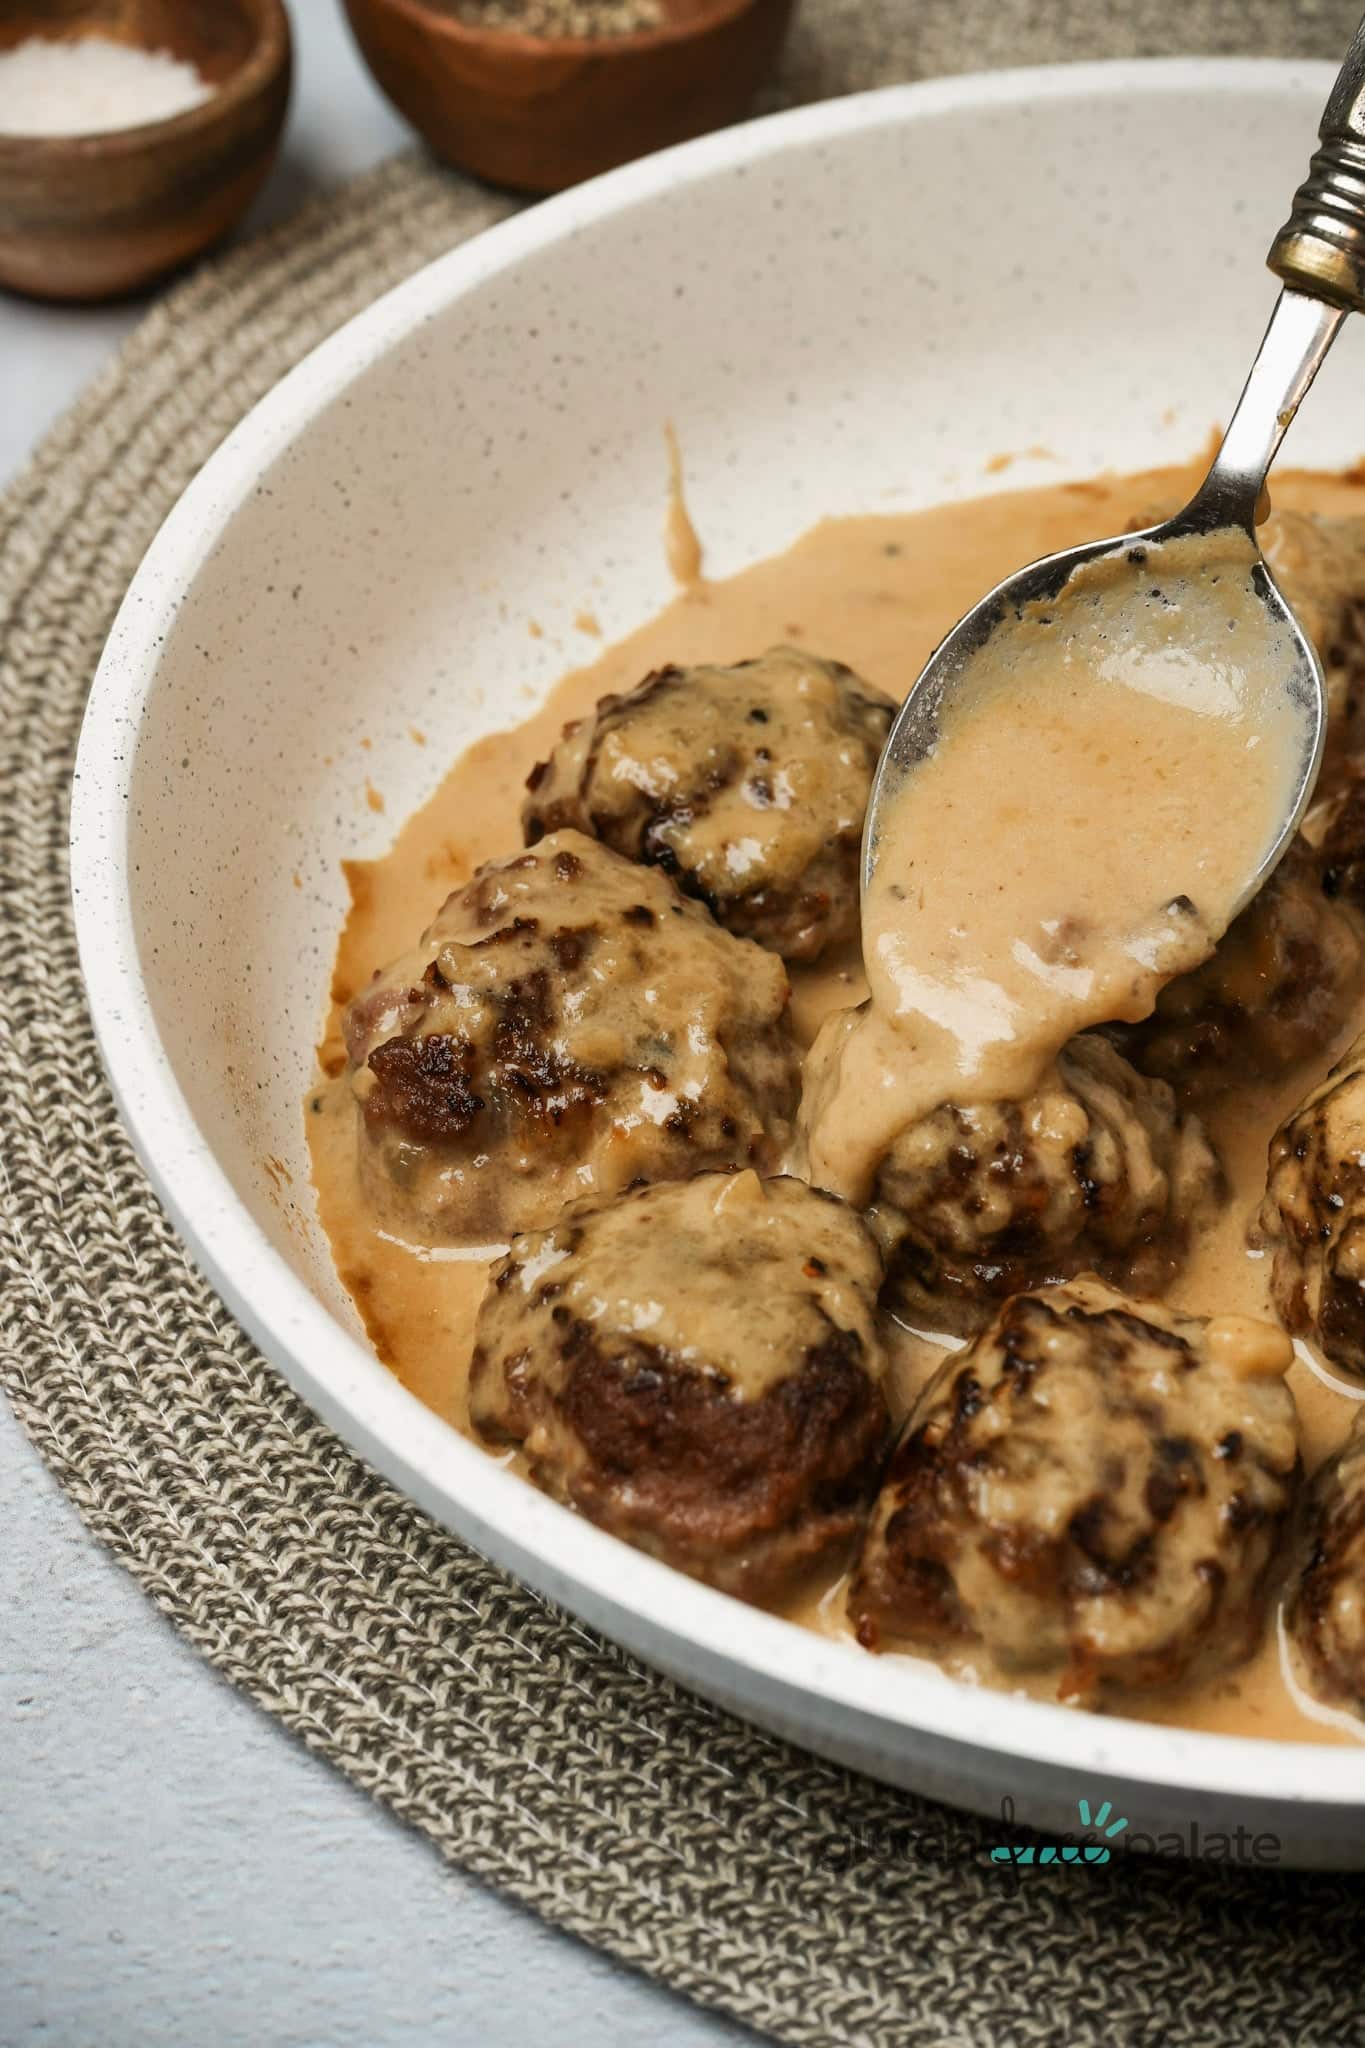 Gluten-Free Swedish meatballs with sauce being poured over them.